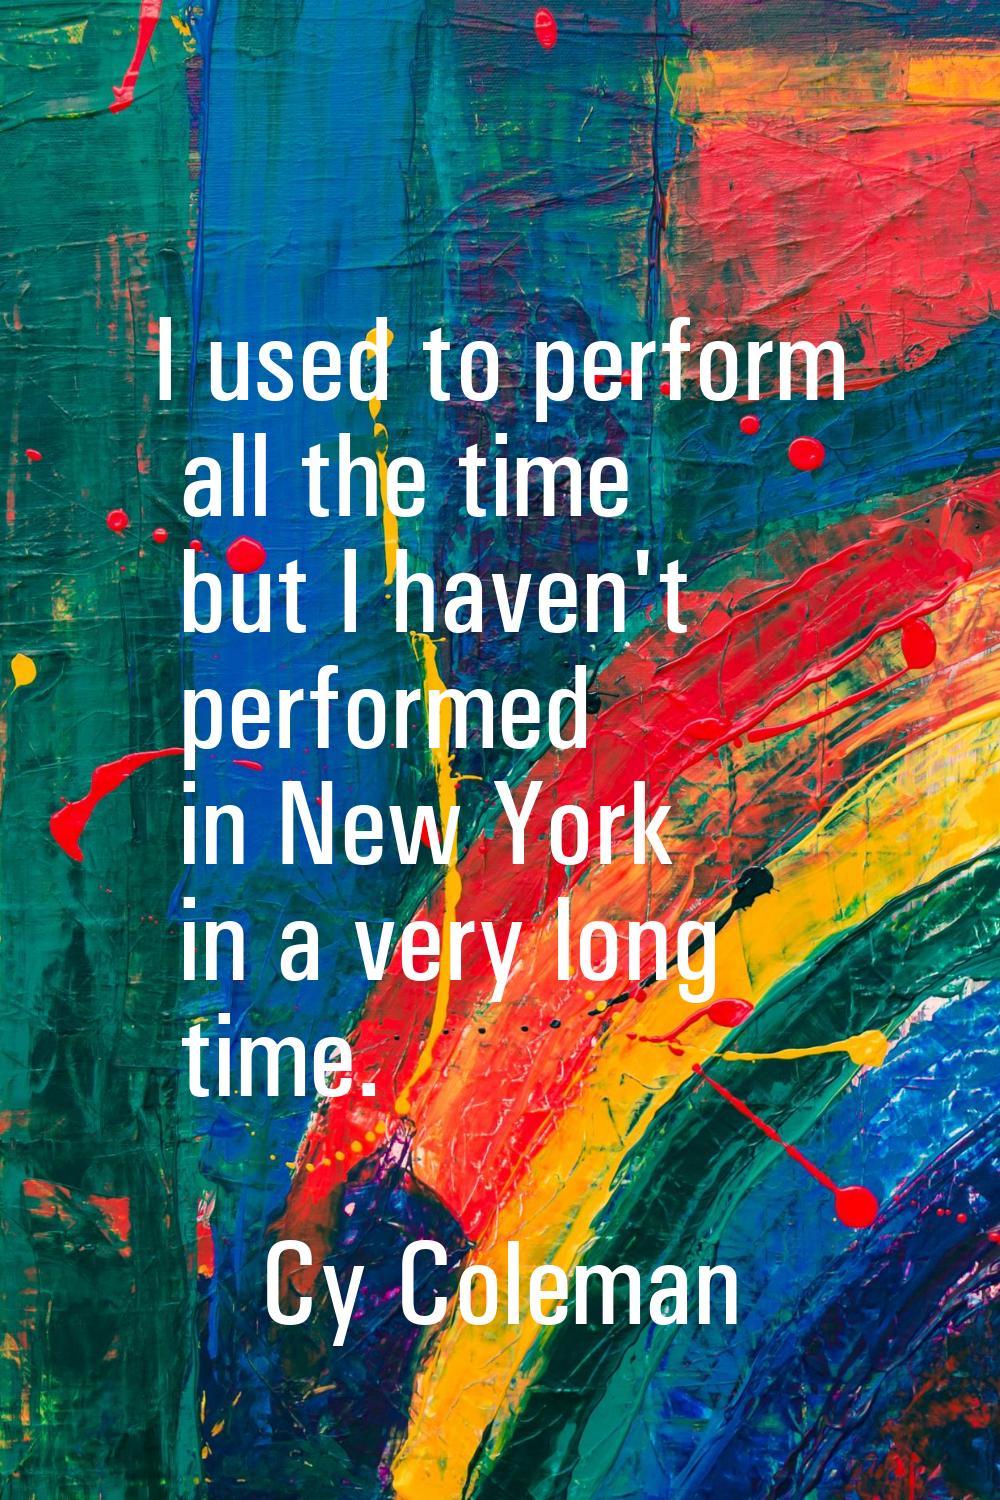 I used to perform all the time but I haven't performed in New York in a very long time.